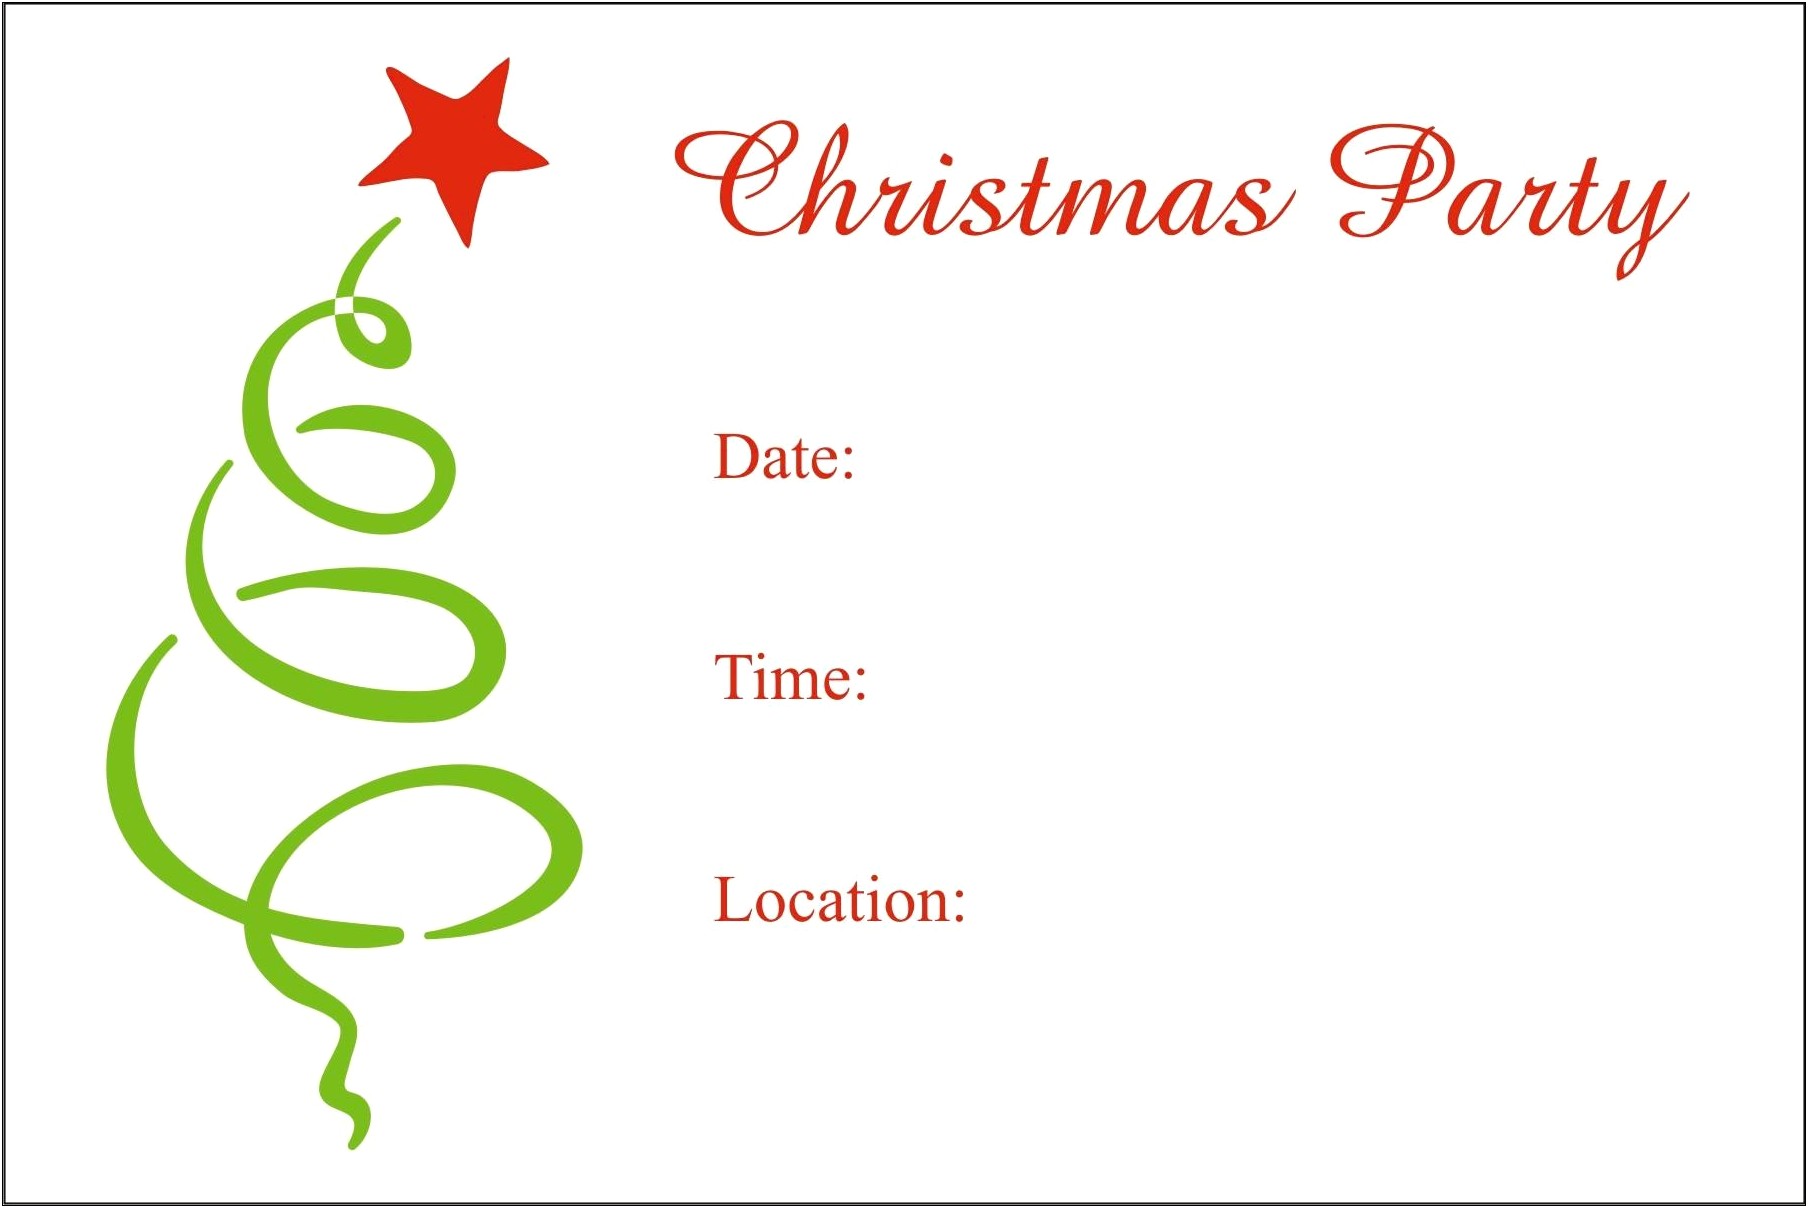 Free Christmas Invitation Templates To Text Message